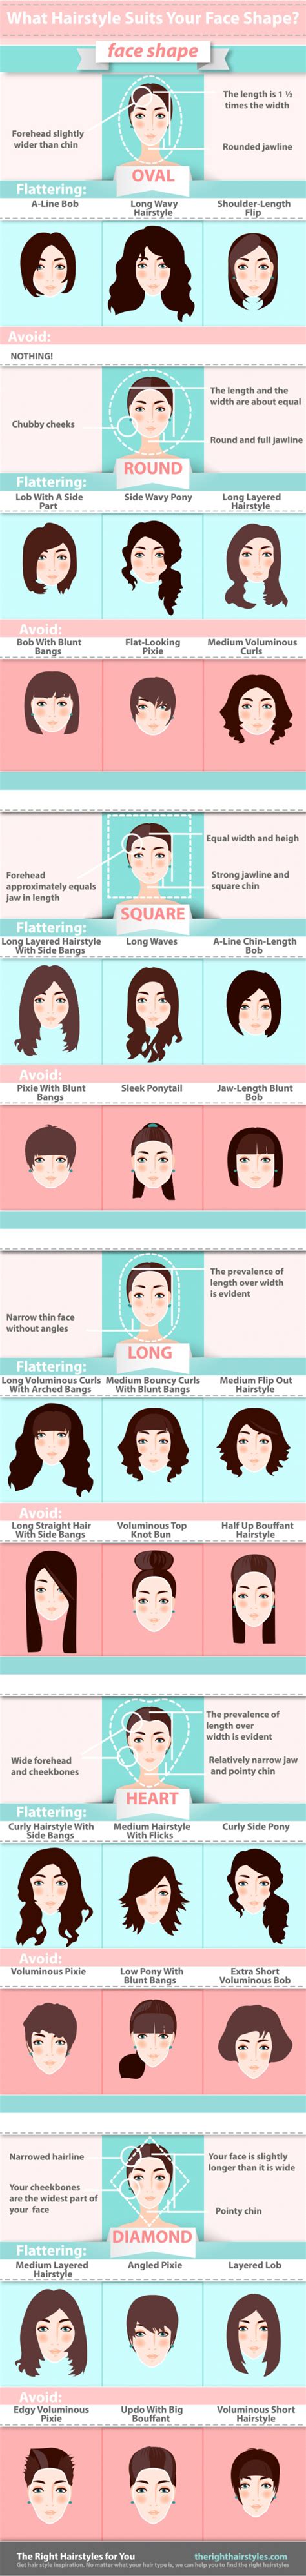 What hairstyle suits a long face? What Hairstyle Suits You According To Your Face Shape ...